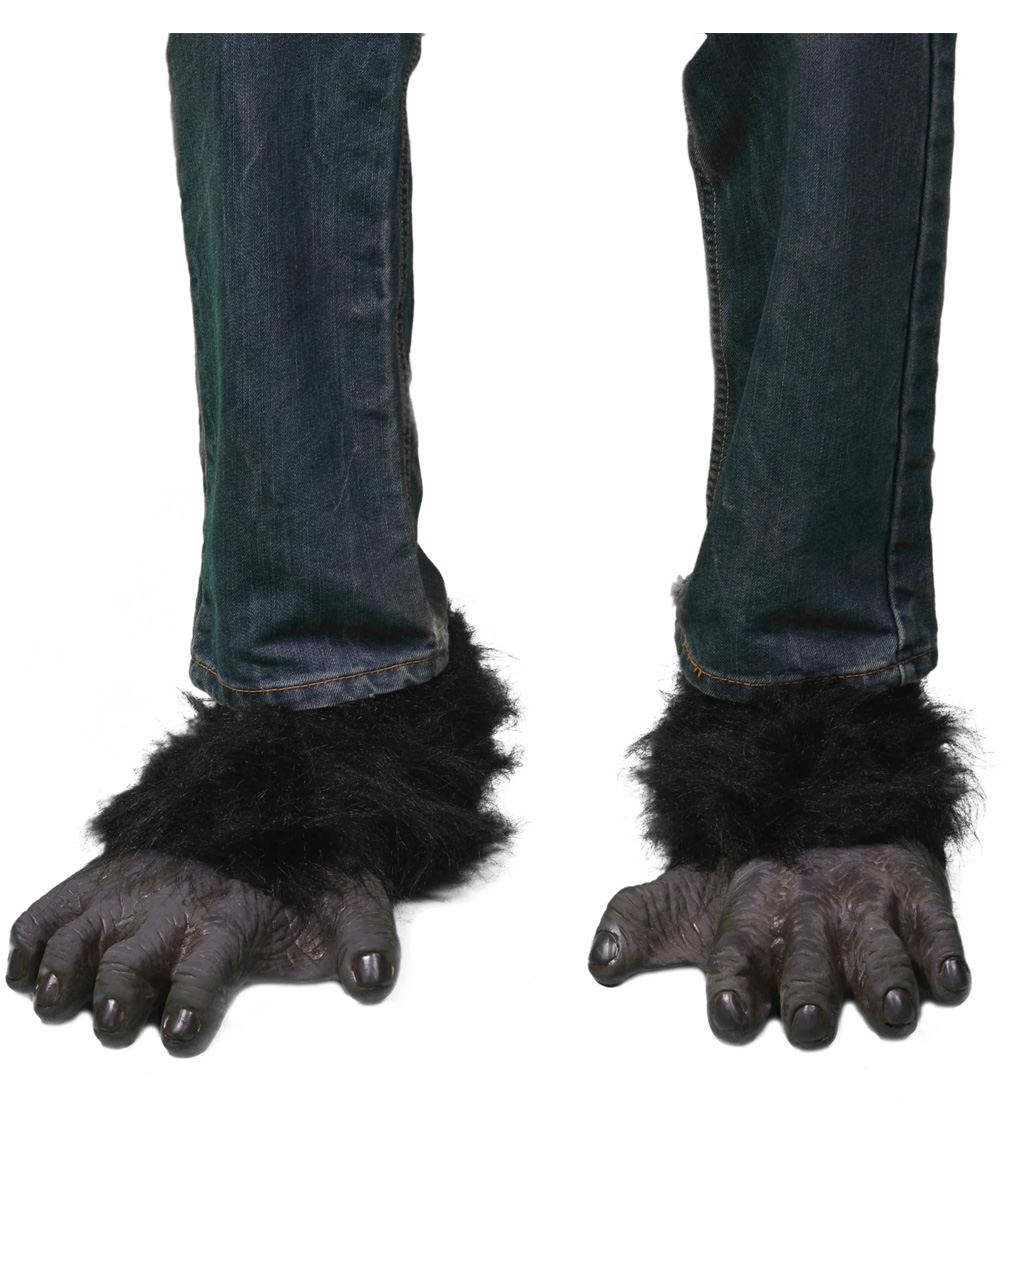 Gorilla Hairy Hands Monkey Chimps #Paws Halloween Fancy Dress Costume Accessory 